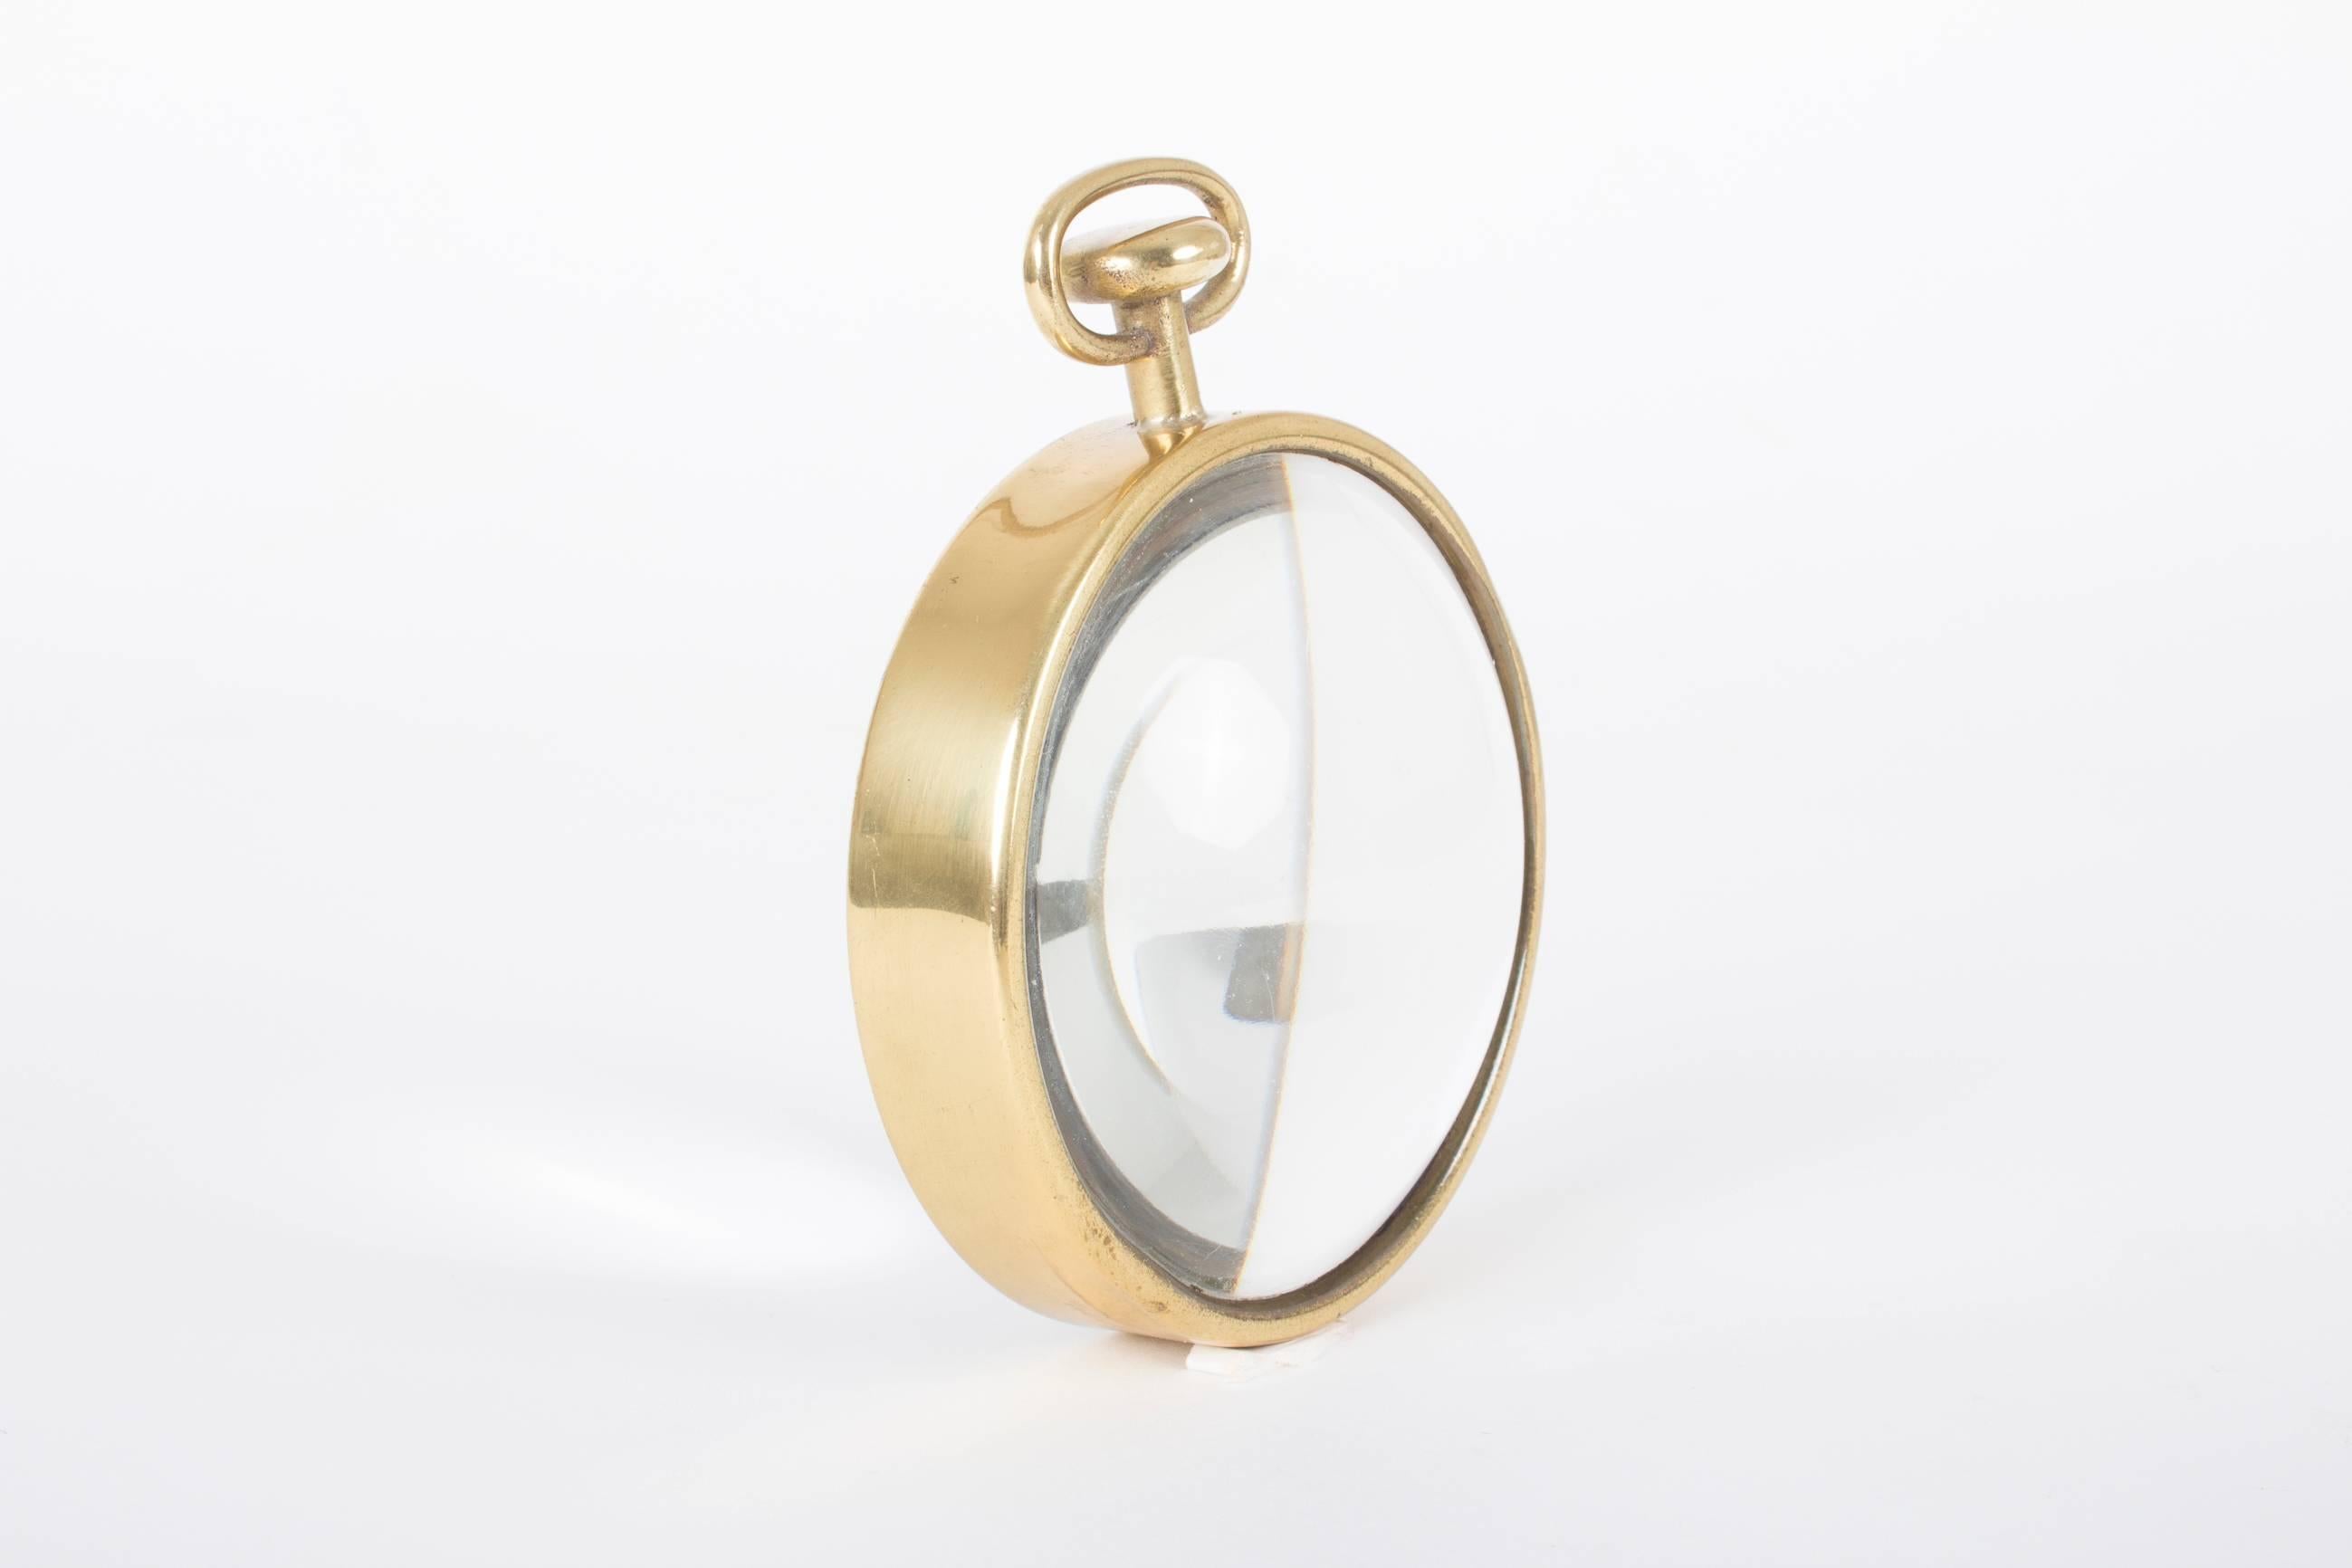 Another fine example of the humorous design by Carl Auböck.
The lens is shaped in the form of a pocket watch and served as a desk accessory. The glass of this magnifier lens seems to be in fine condition, the brass mount has to